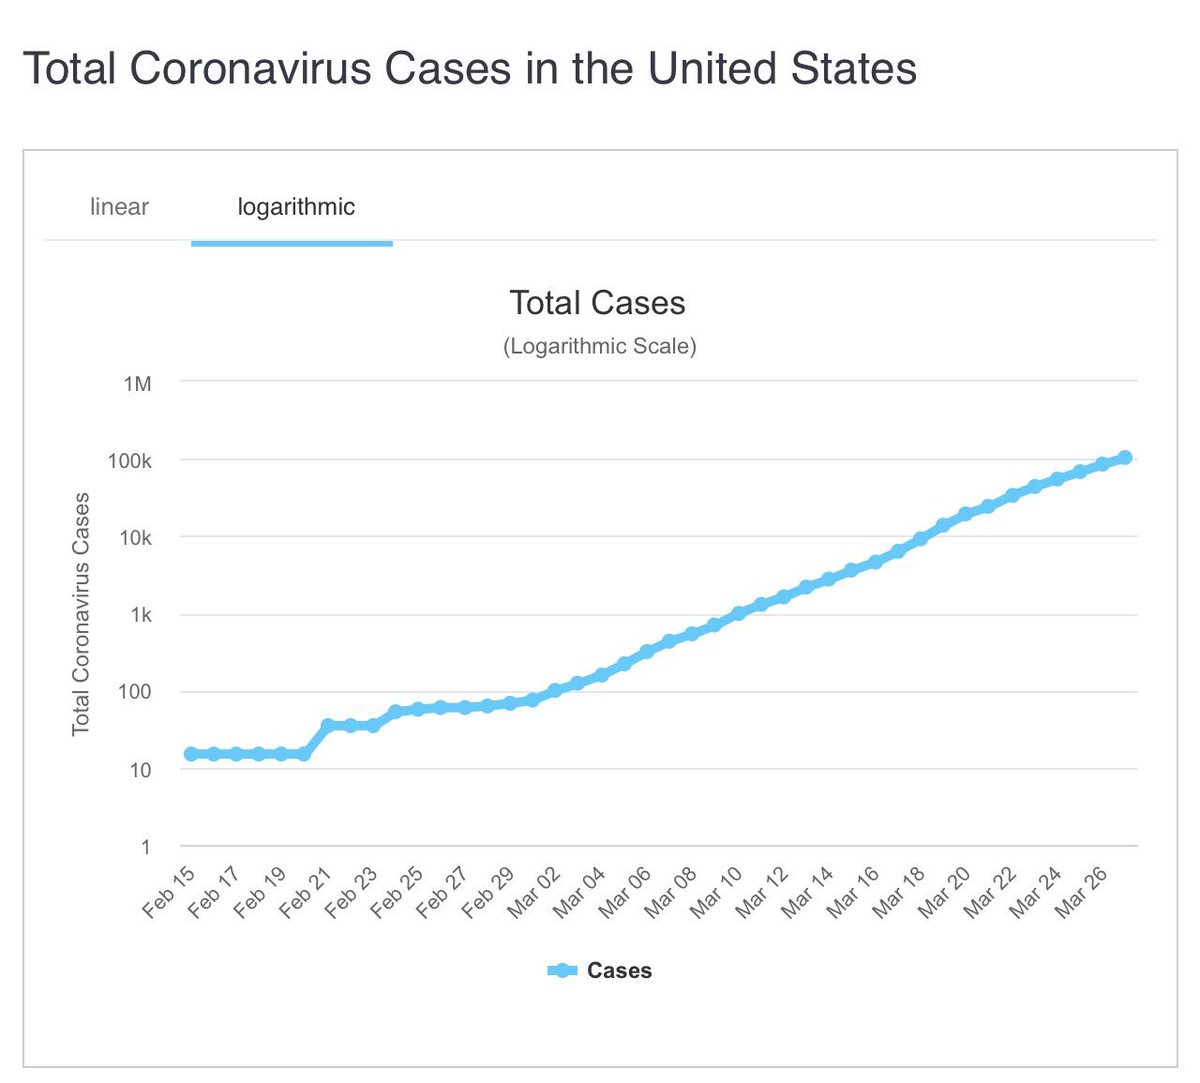 The number of cases in the US doubled every 3 to 5 days in February and March. If we allowed that to happen on campus, 0.3% would grow to the 80% required for herd immunity in 8 doublings. It would take just 24 to 40 days7/